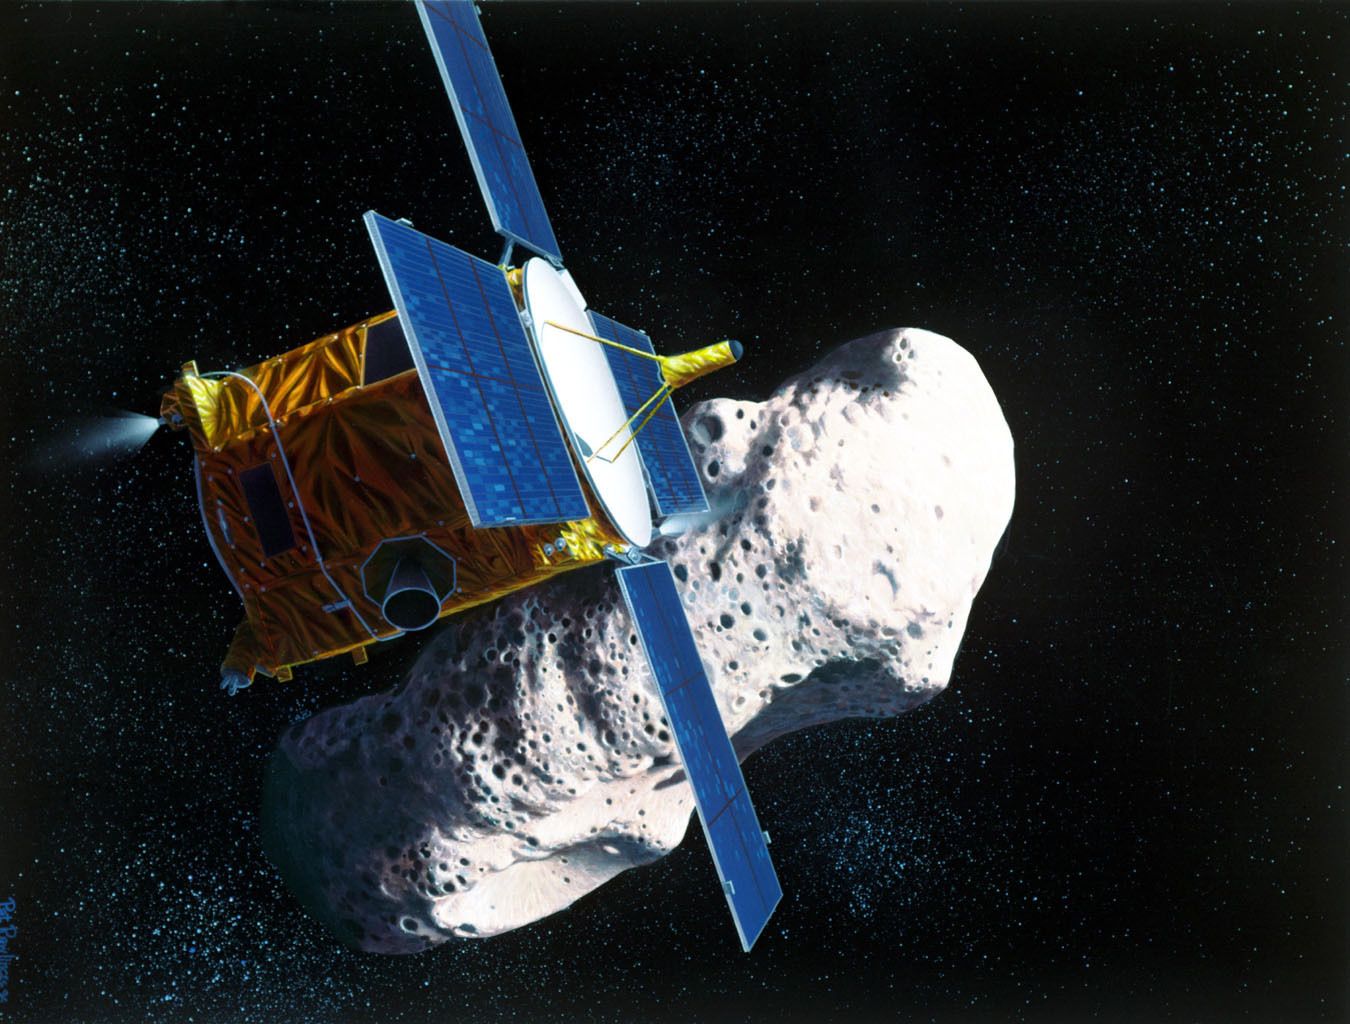 Artist concept of NEAR with Eros